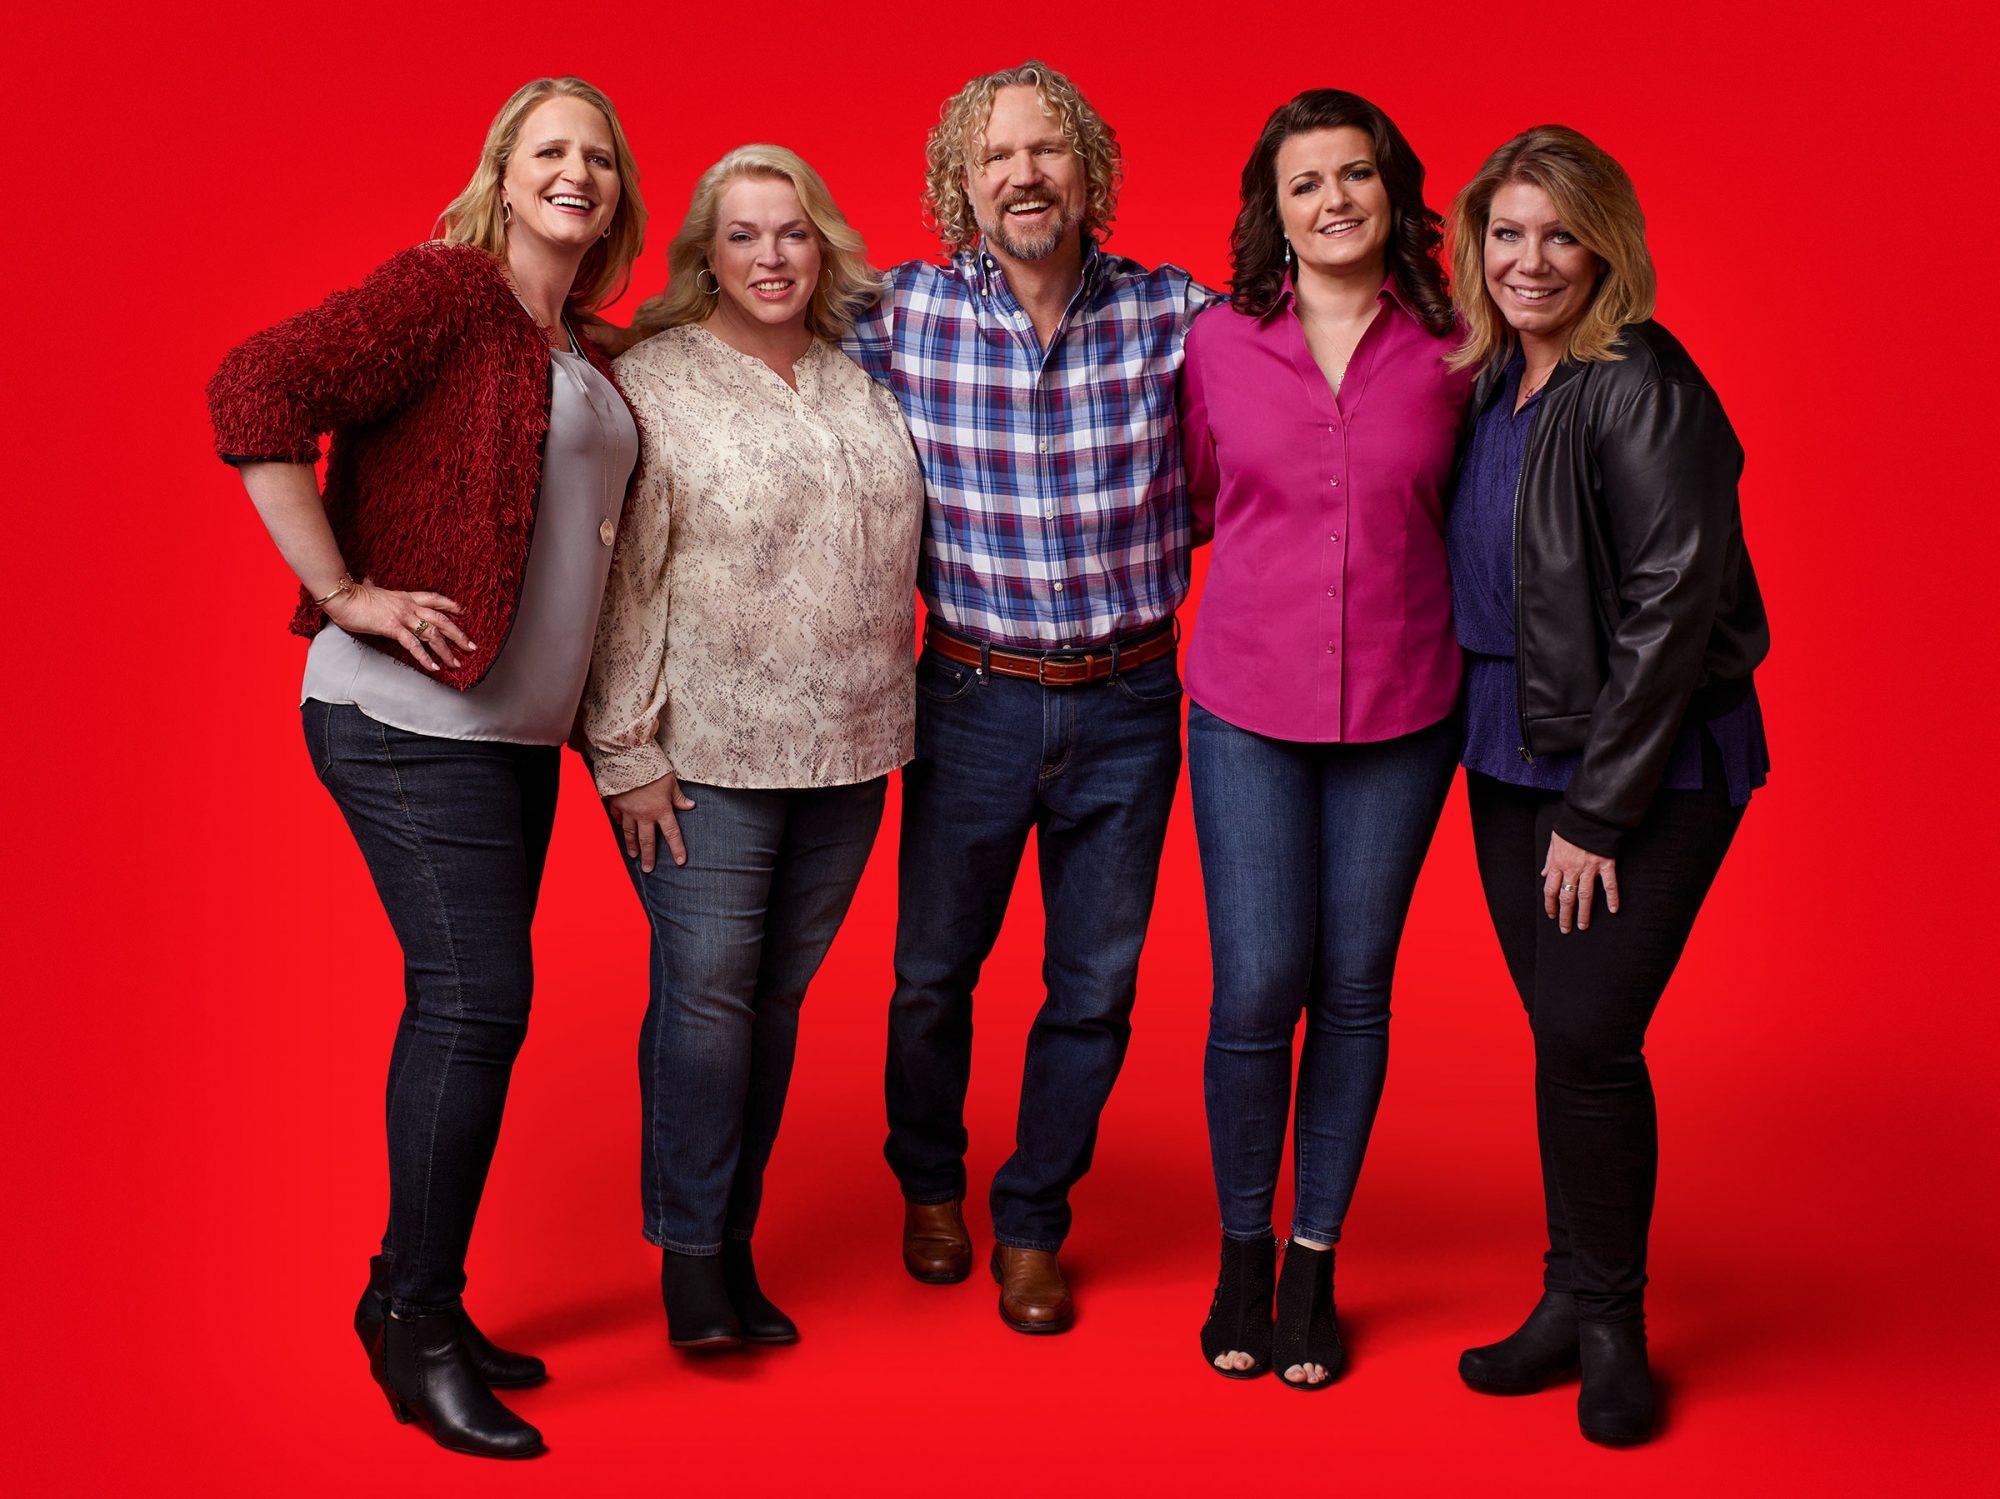 Sister Wives Janelle Brown Inspired Many Fans Here’s Why!